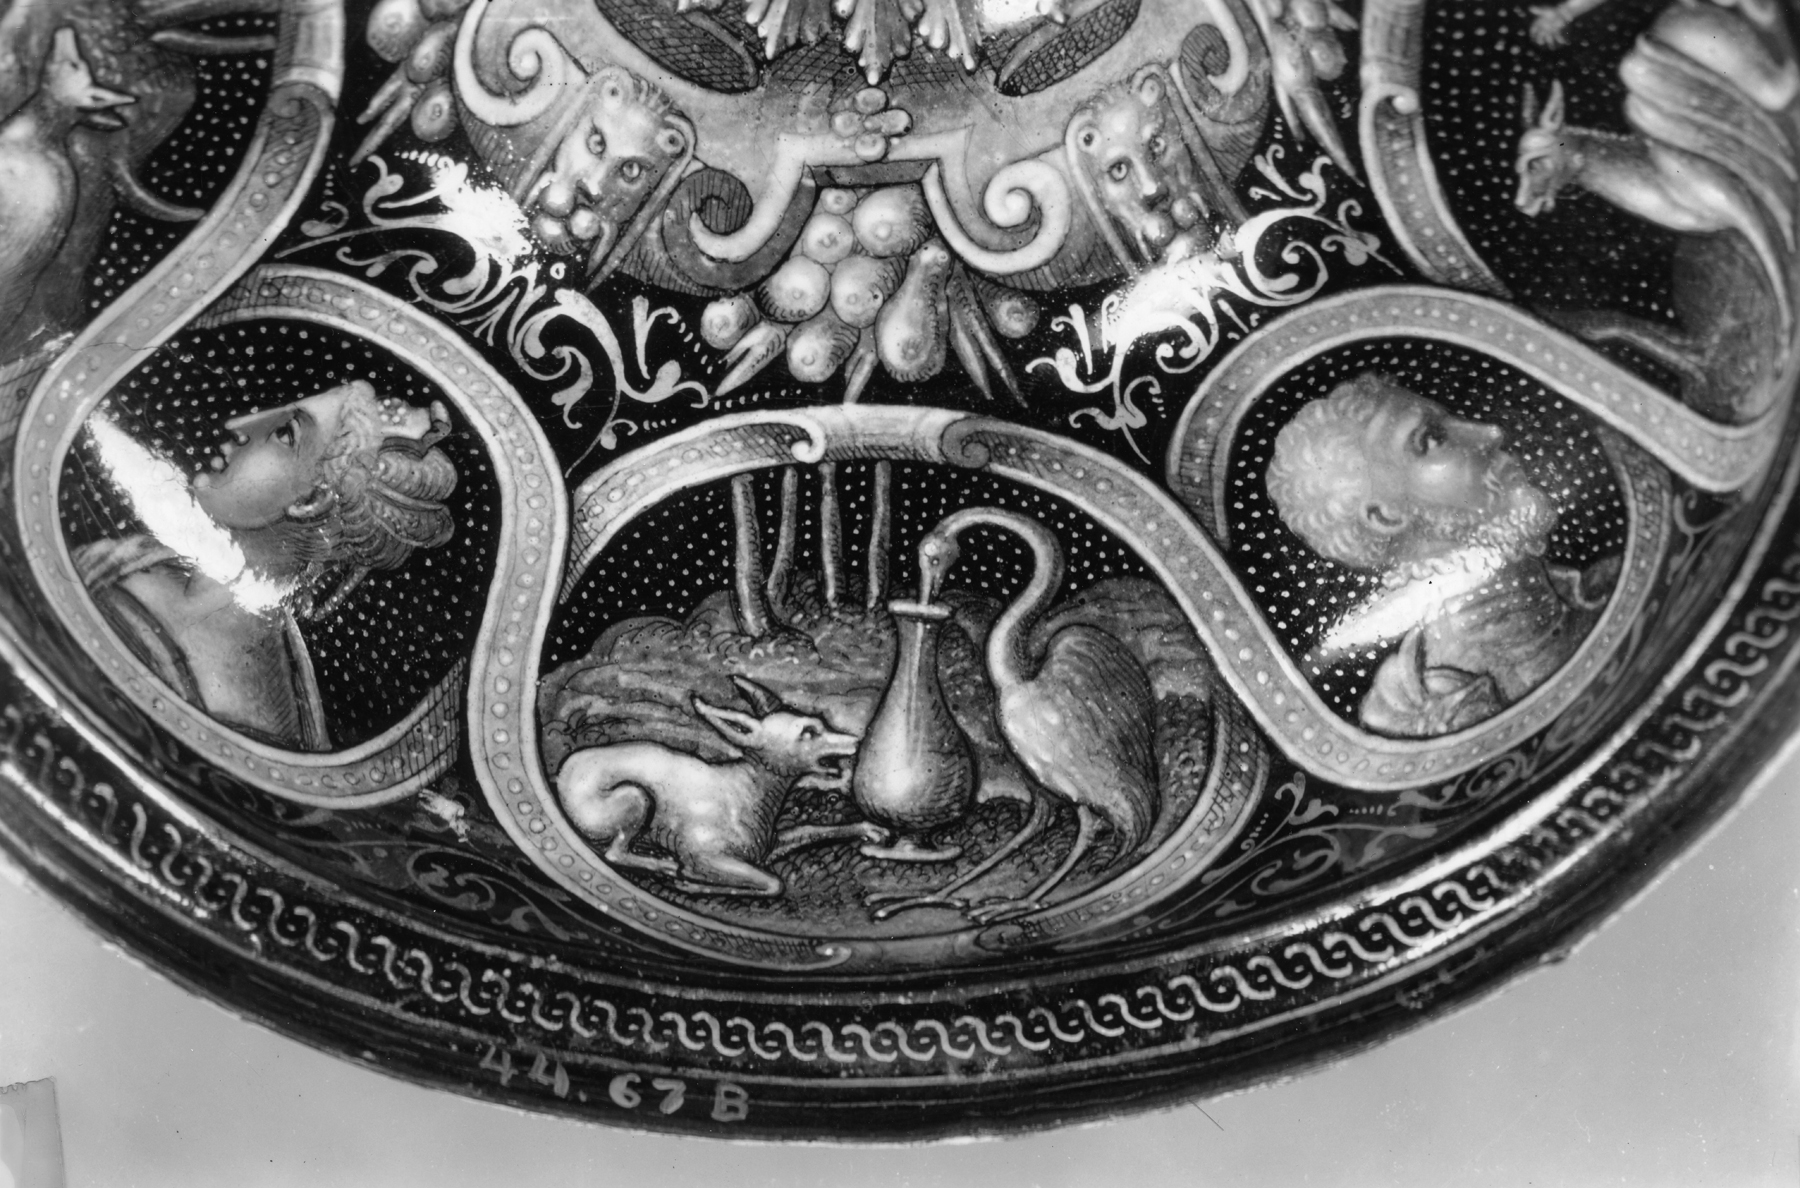 Image for One of a Pair of Covered Footed Bowls with Abraham and Lot